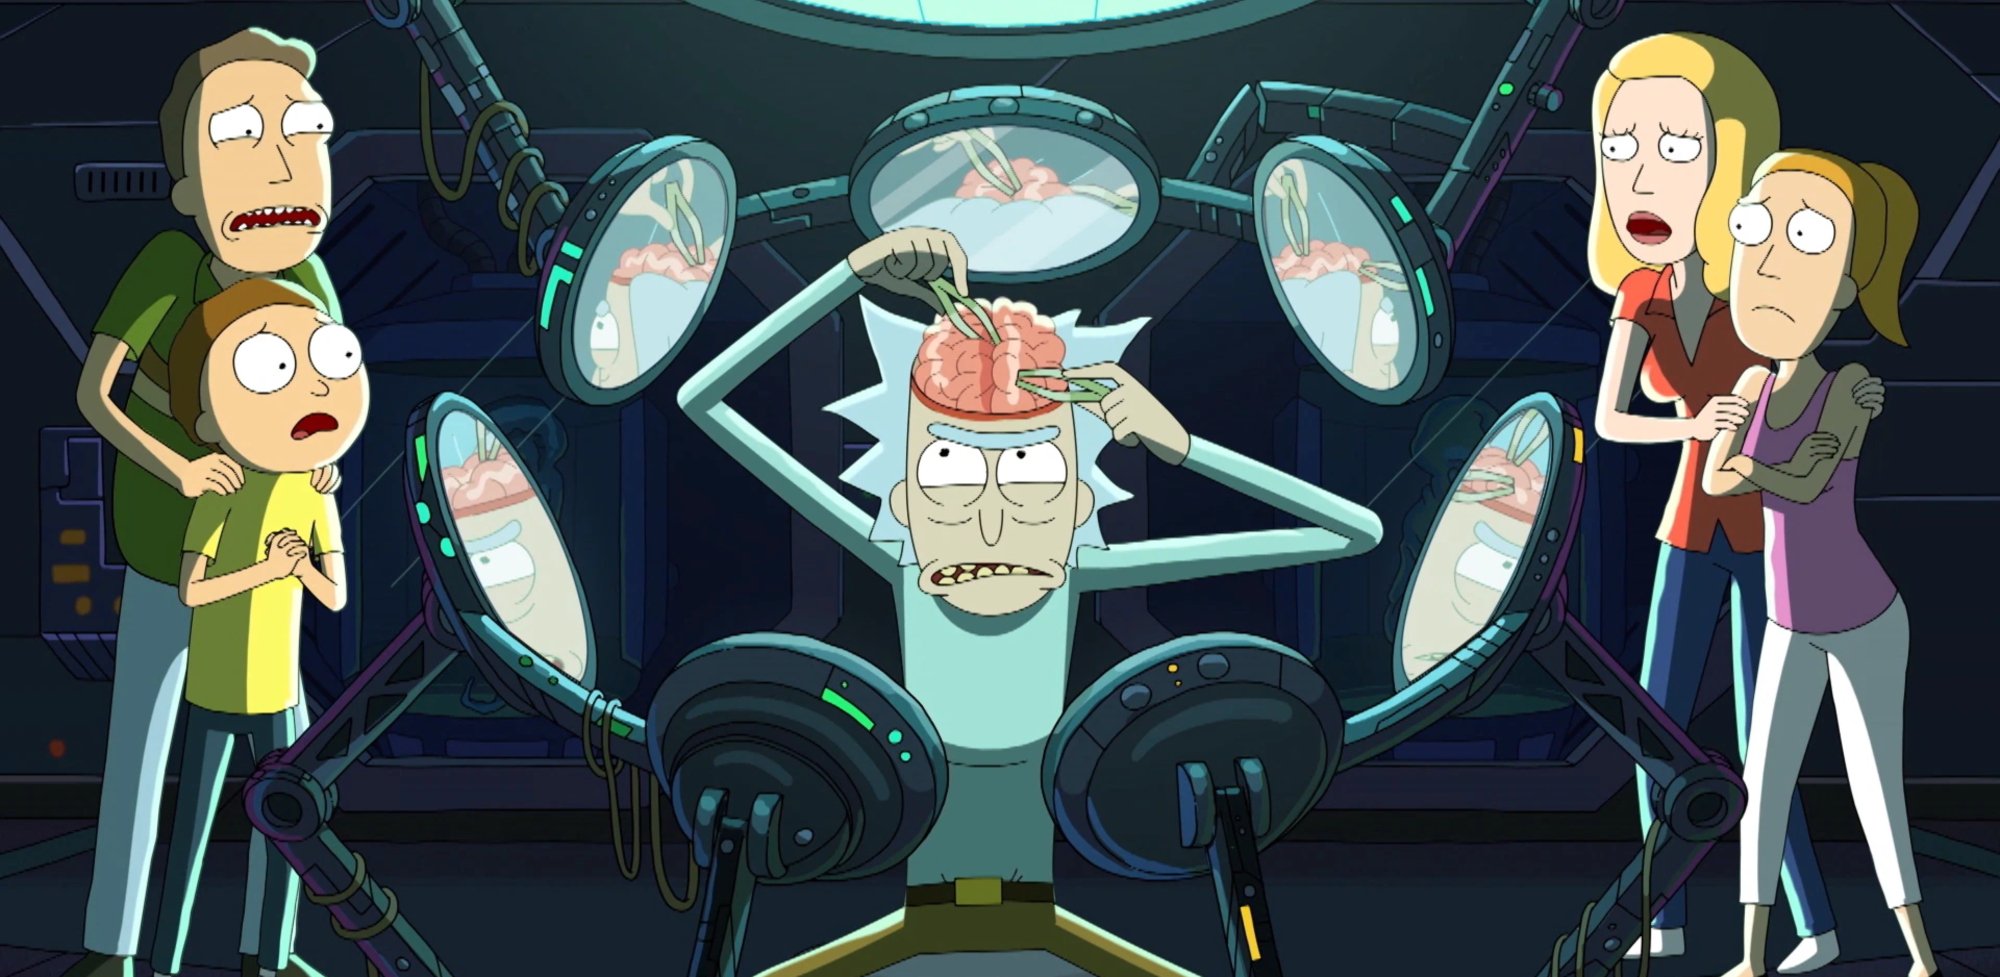 Main characters in 'Mortyplicity' in 'Rick and Morty' Season 5.